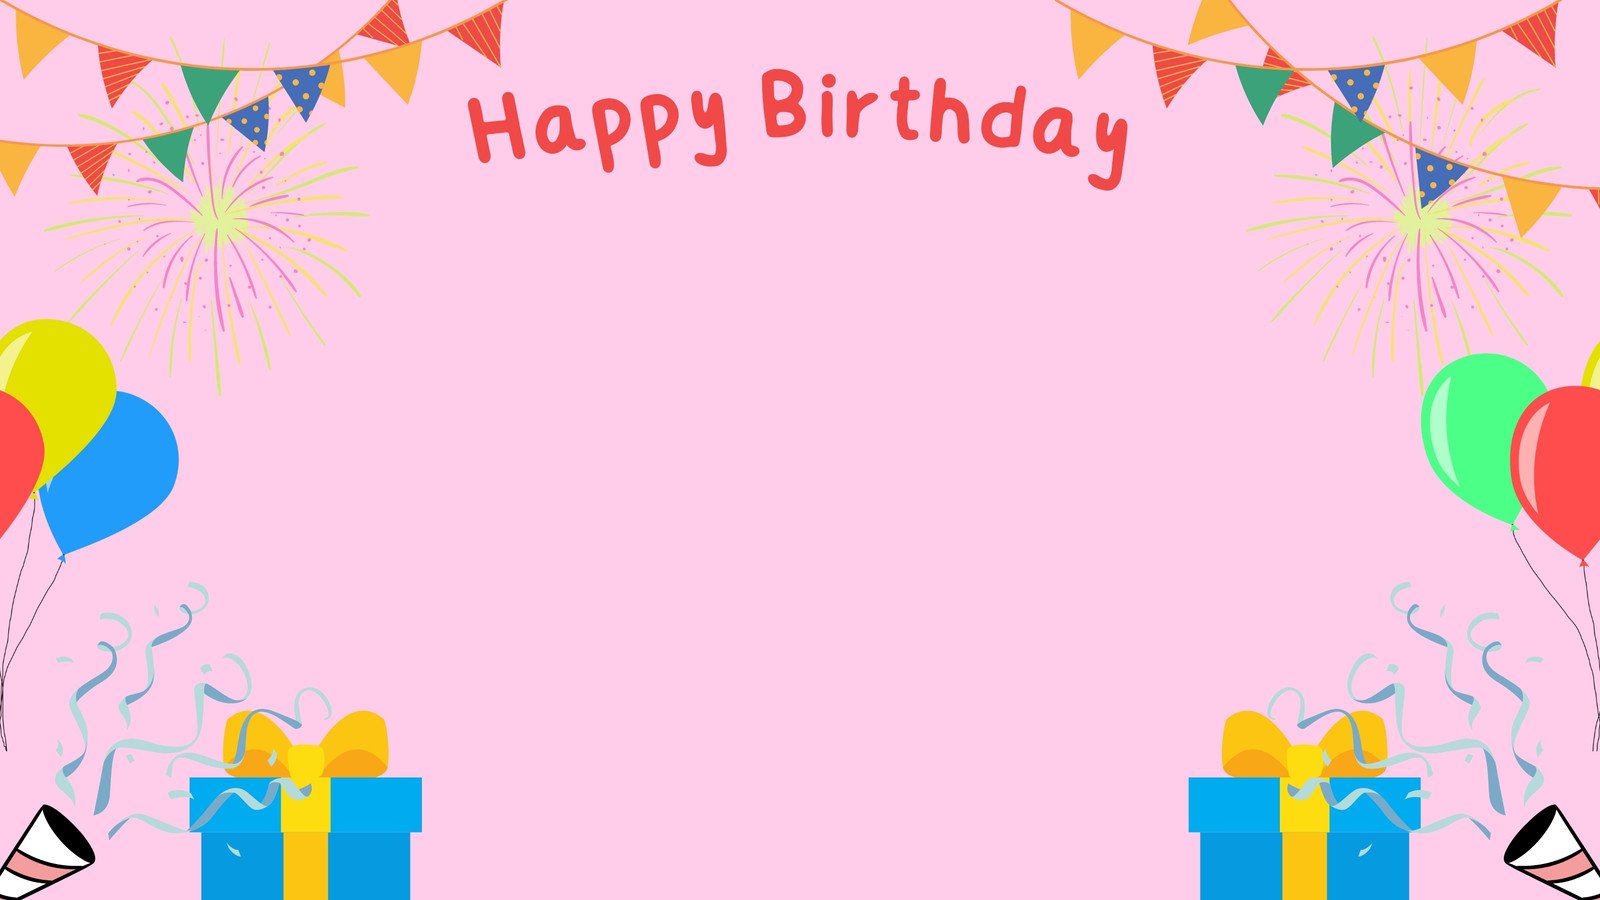 Free and customizable hd birthday background templates